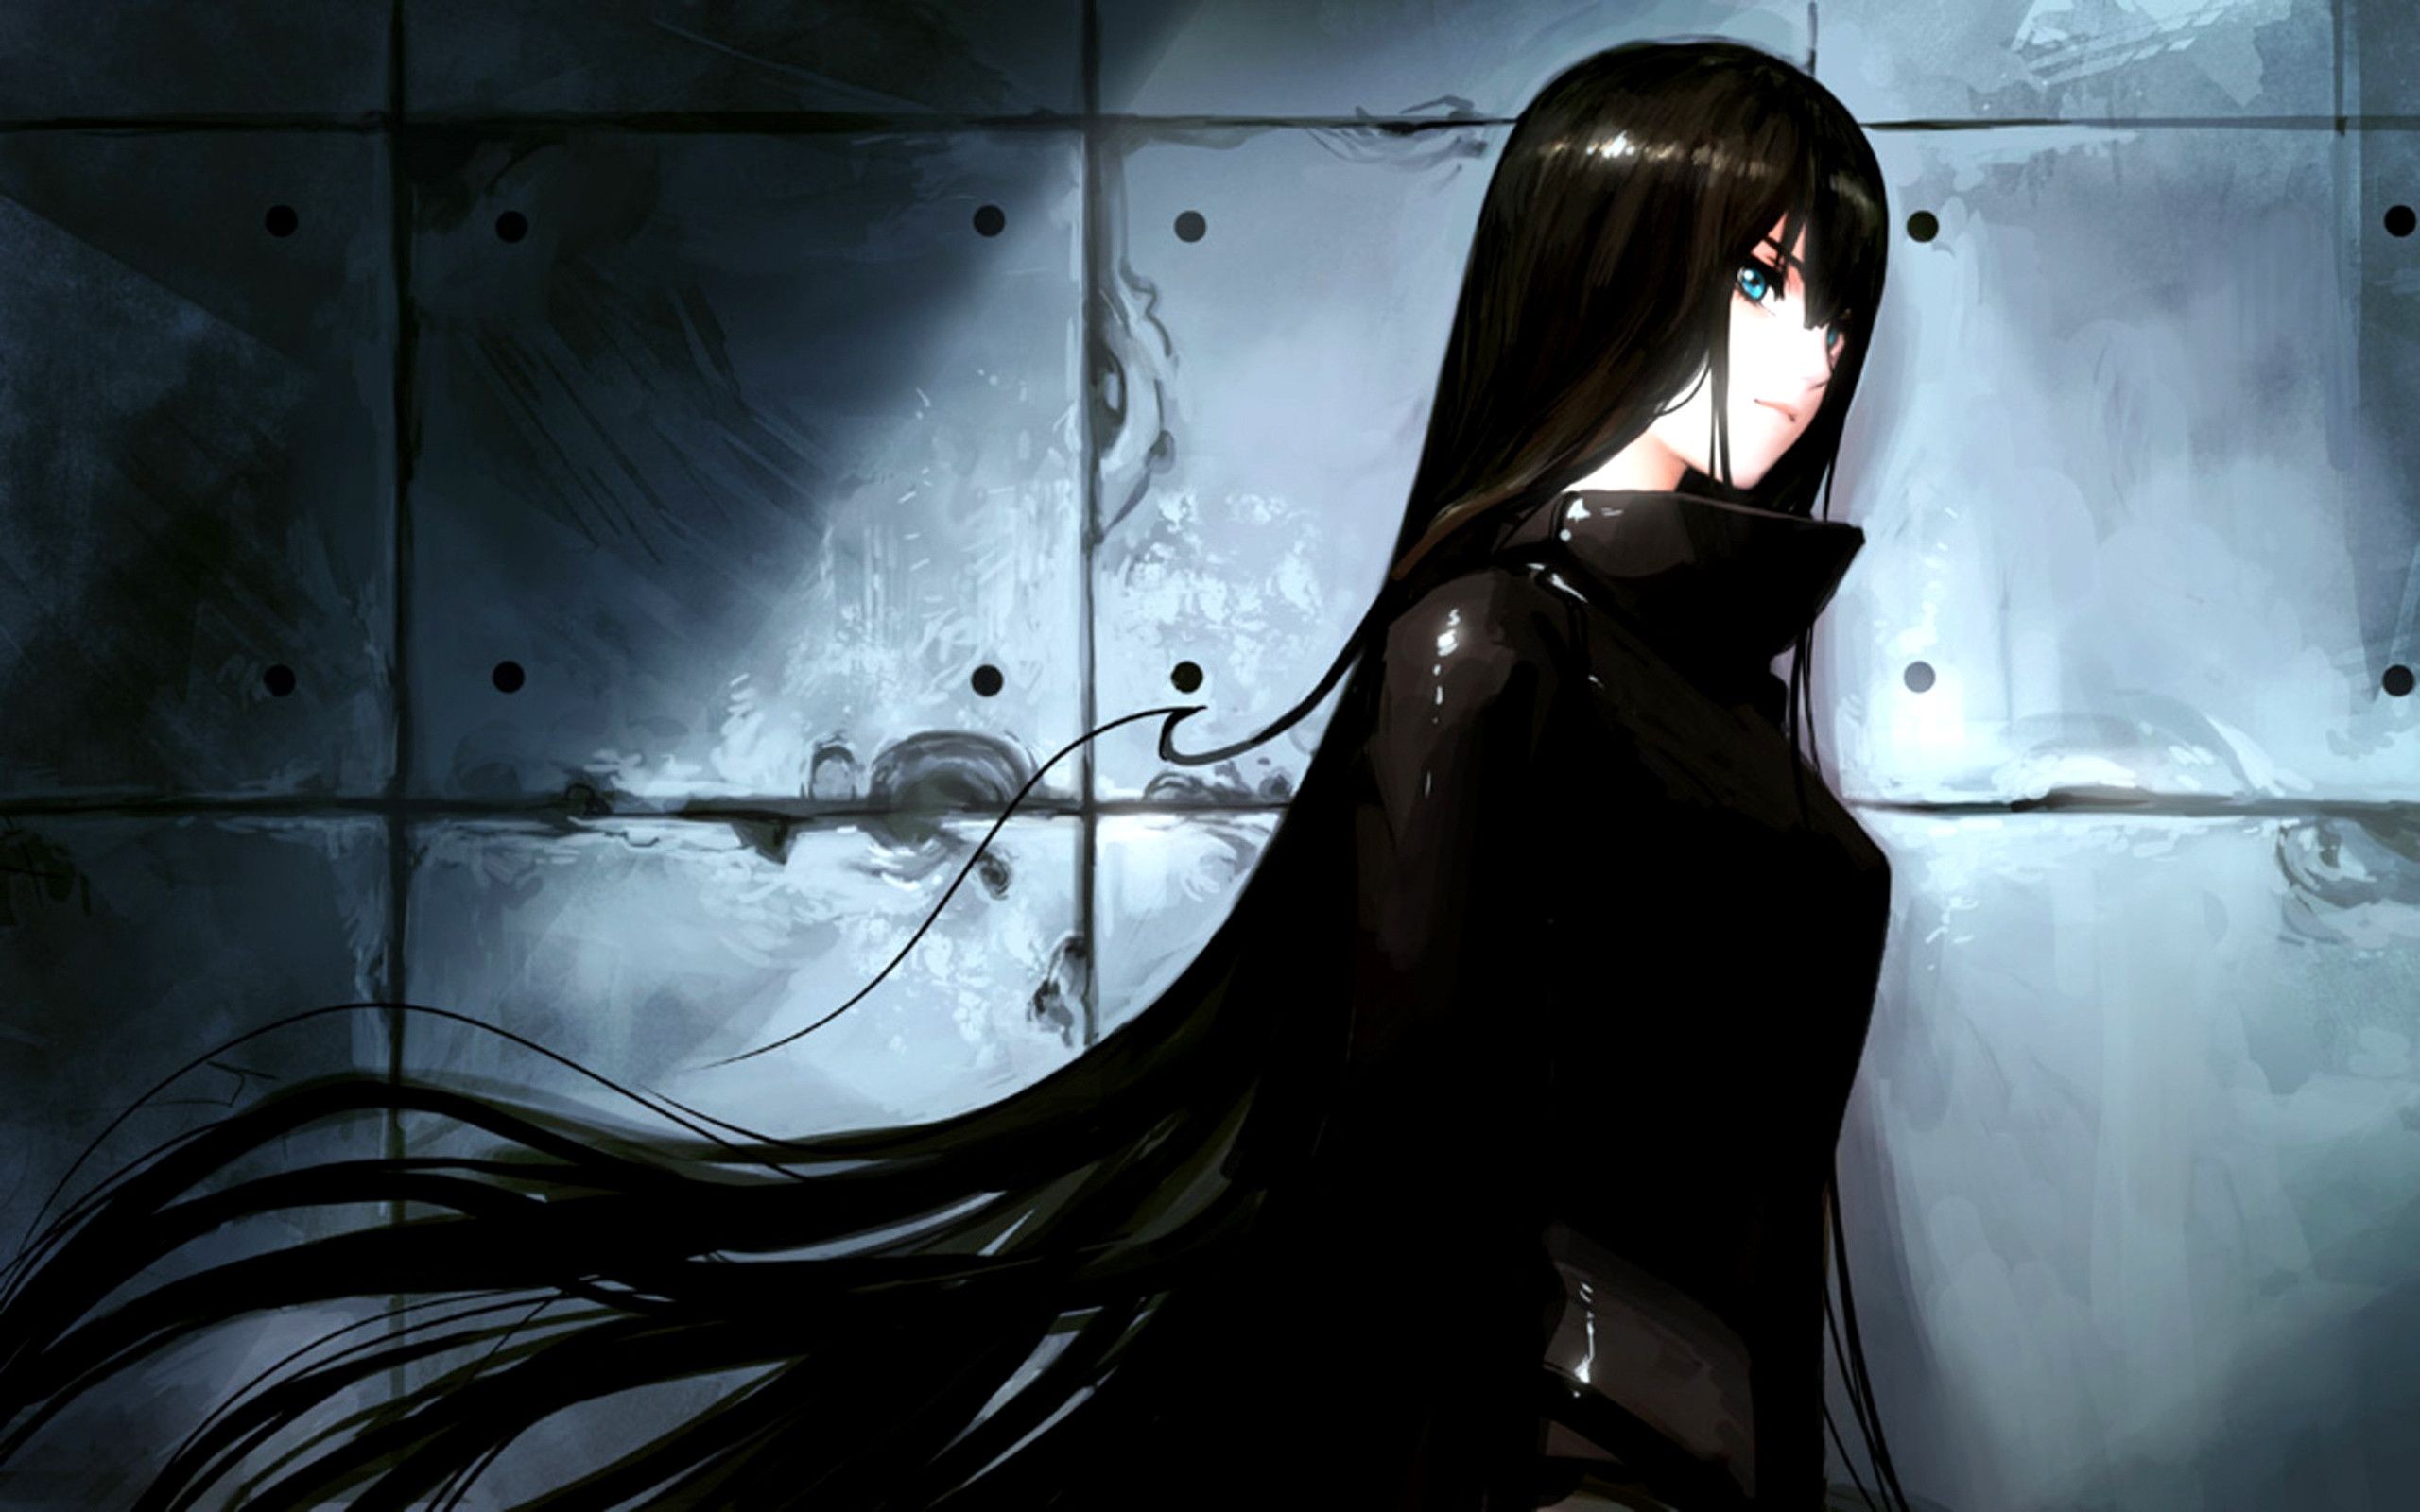 Gothic Anime Wallpaper HD Cool Image Amazing Colourful